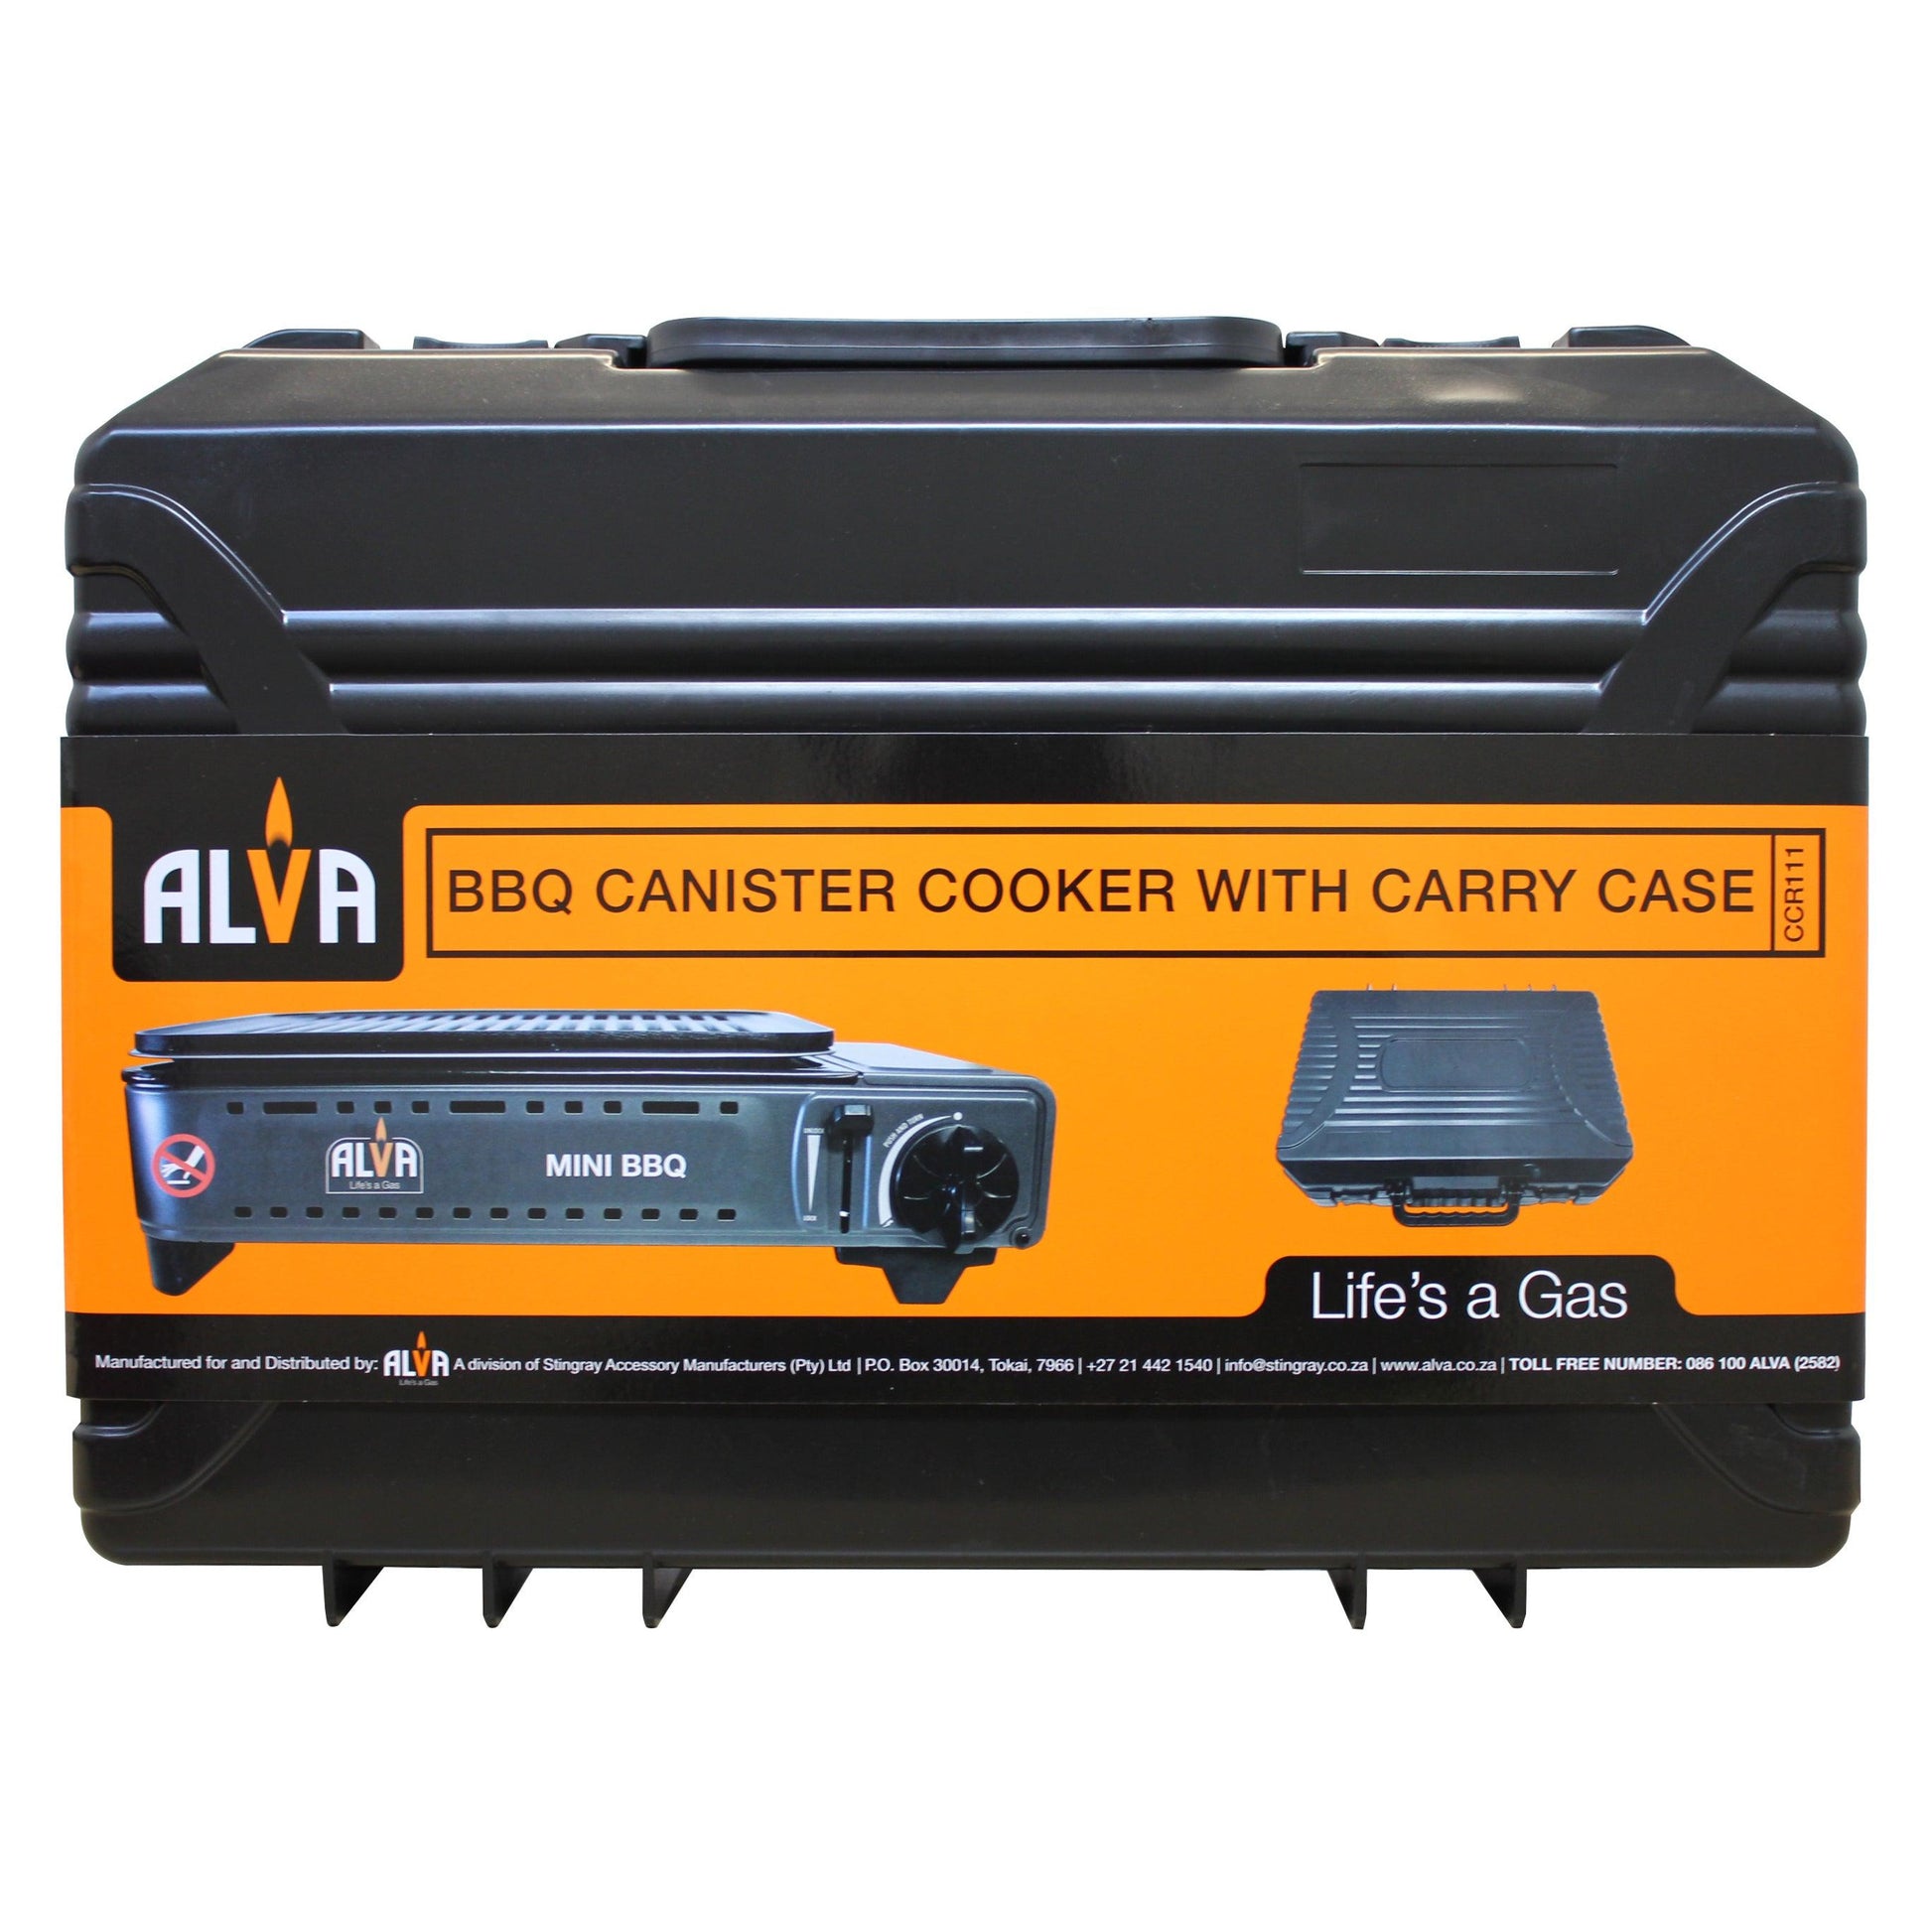 BBQ BUTANE CANISTER COOKER WITH CARRY CASE - Alva Lifestyle Retail